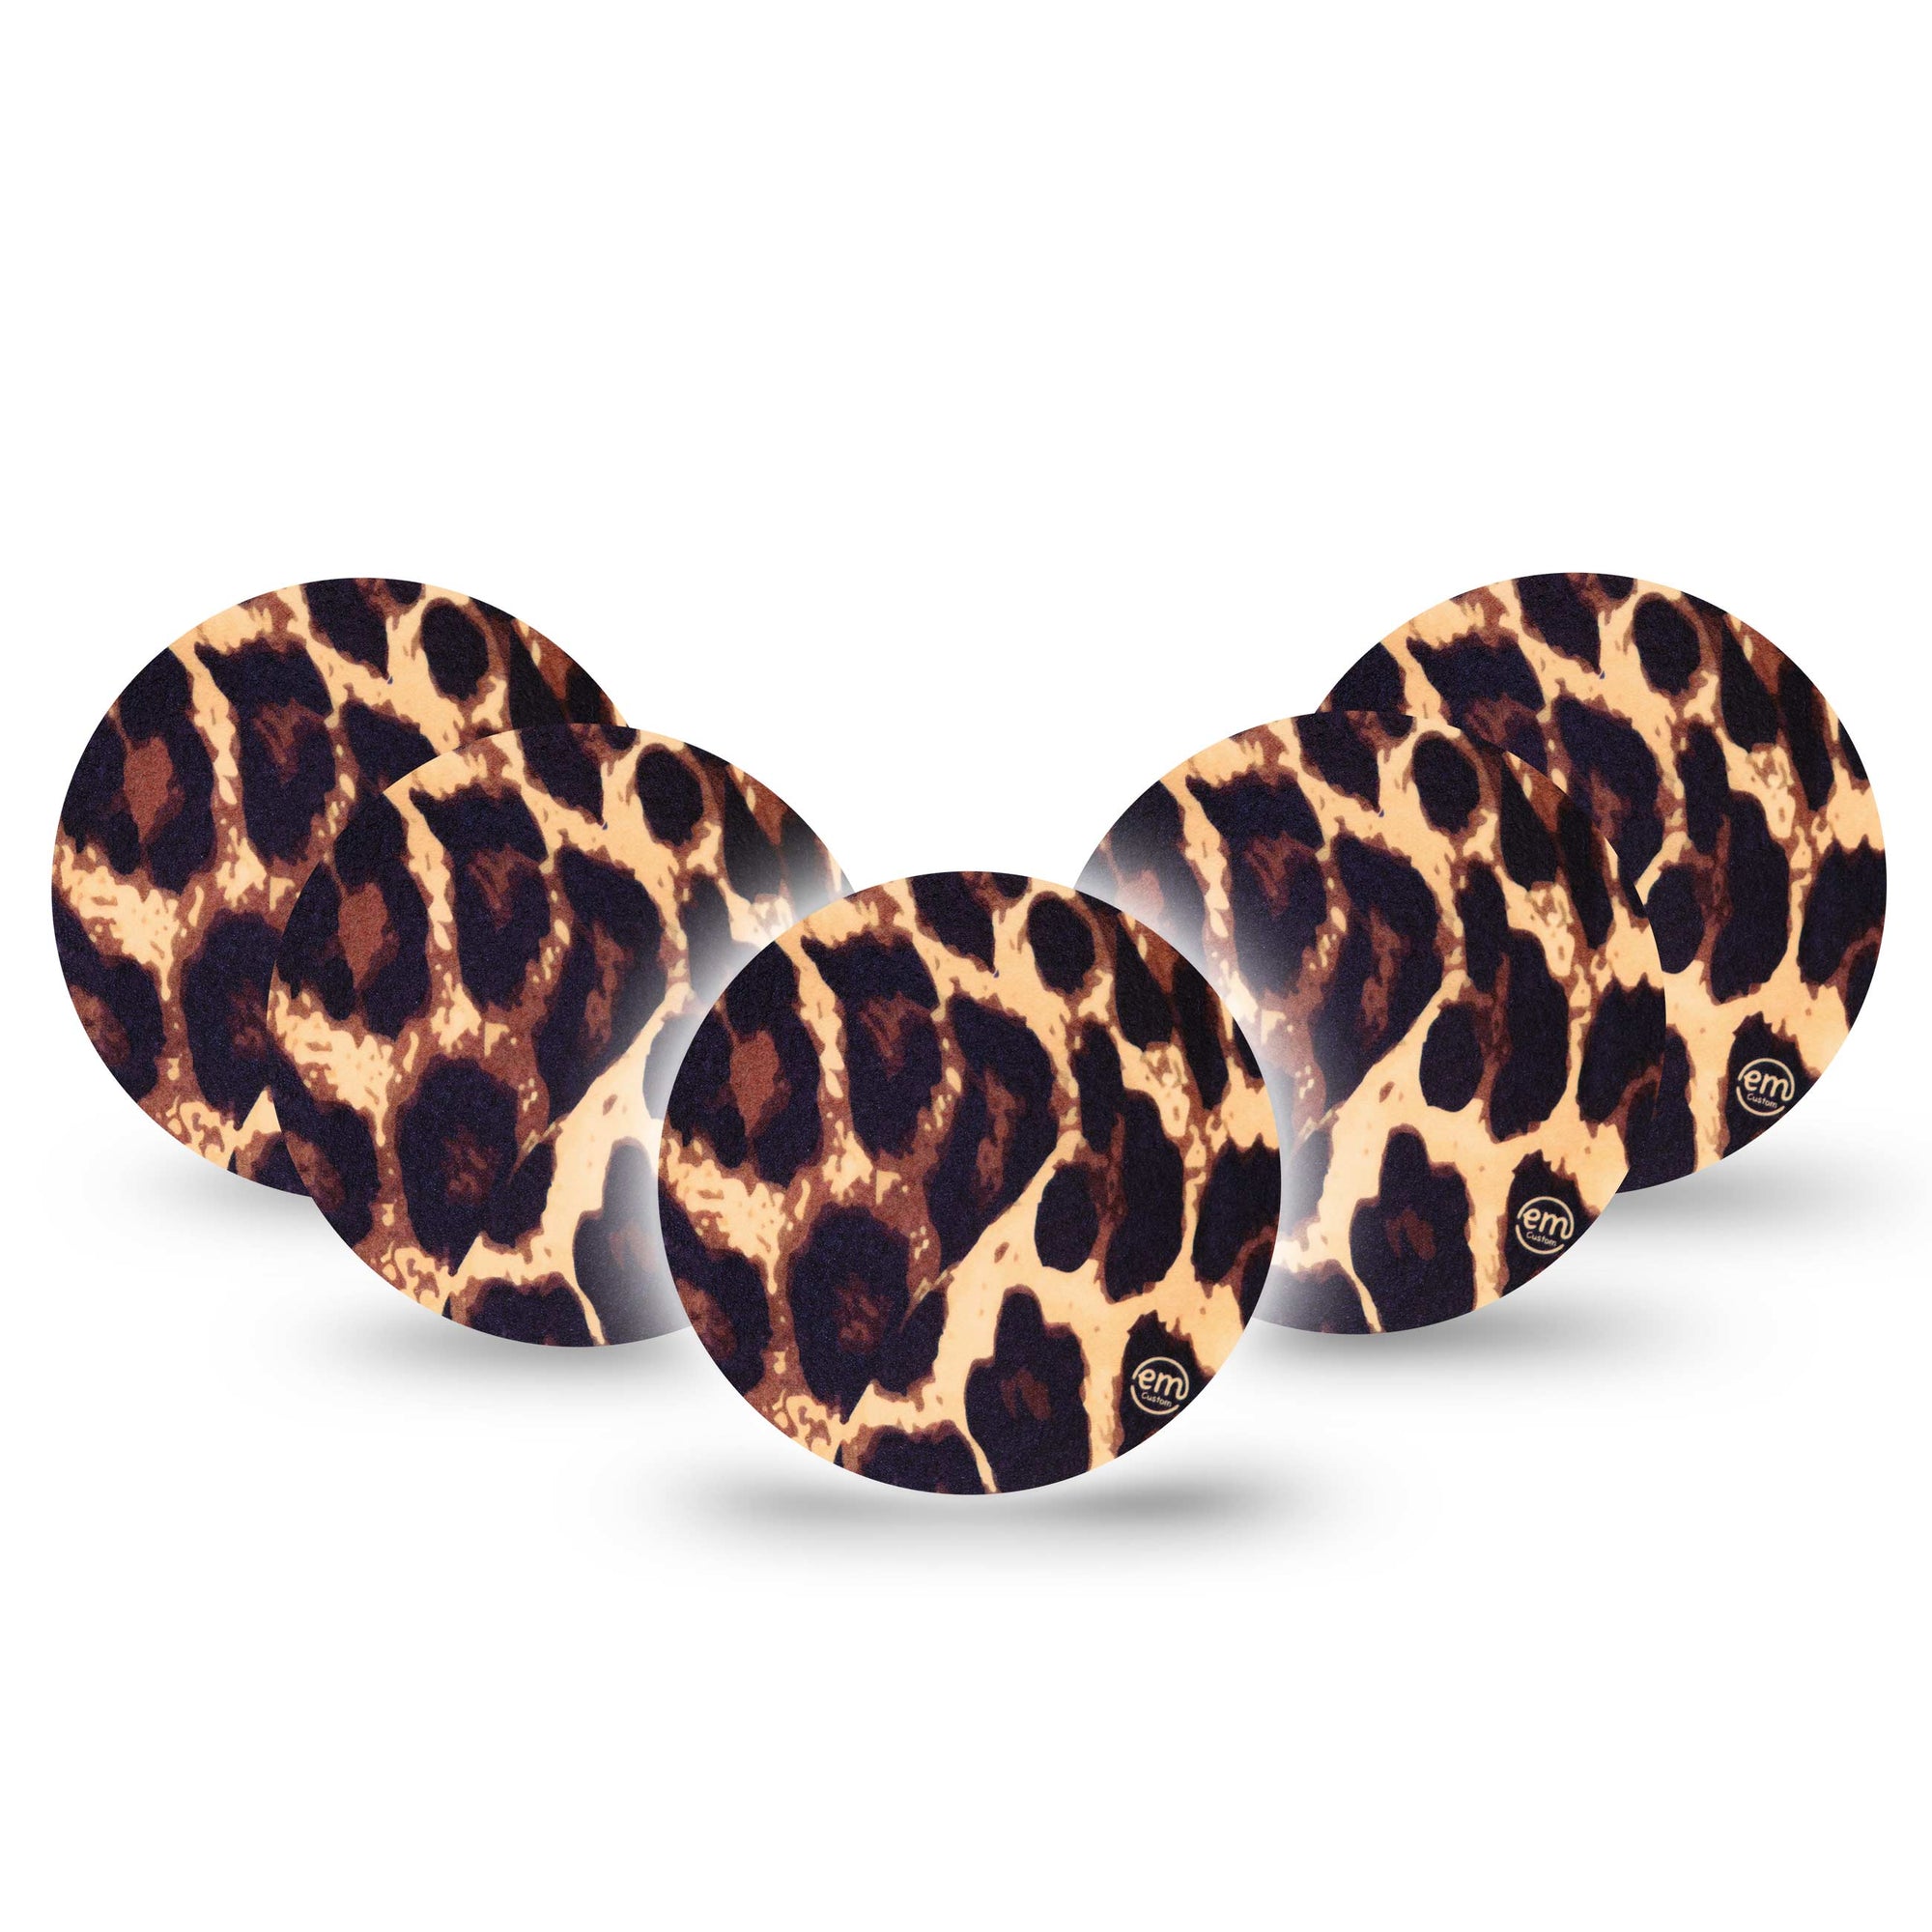 ExpressionMed Leopard Libre Overpatch 5-Pack